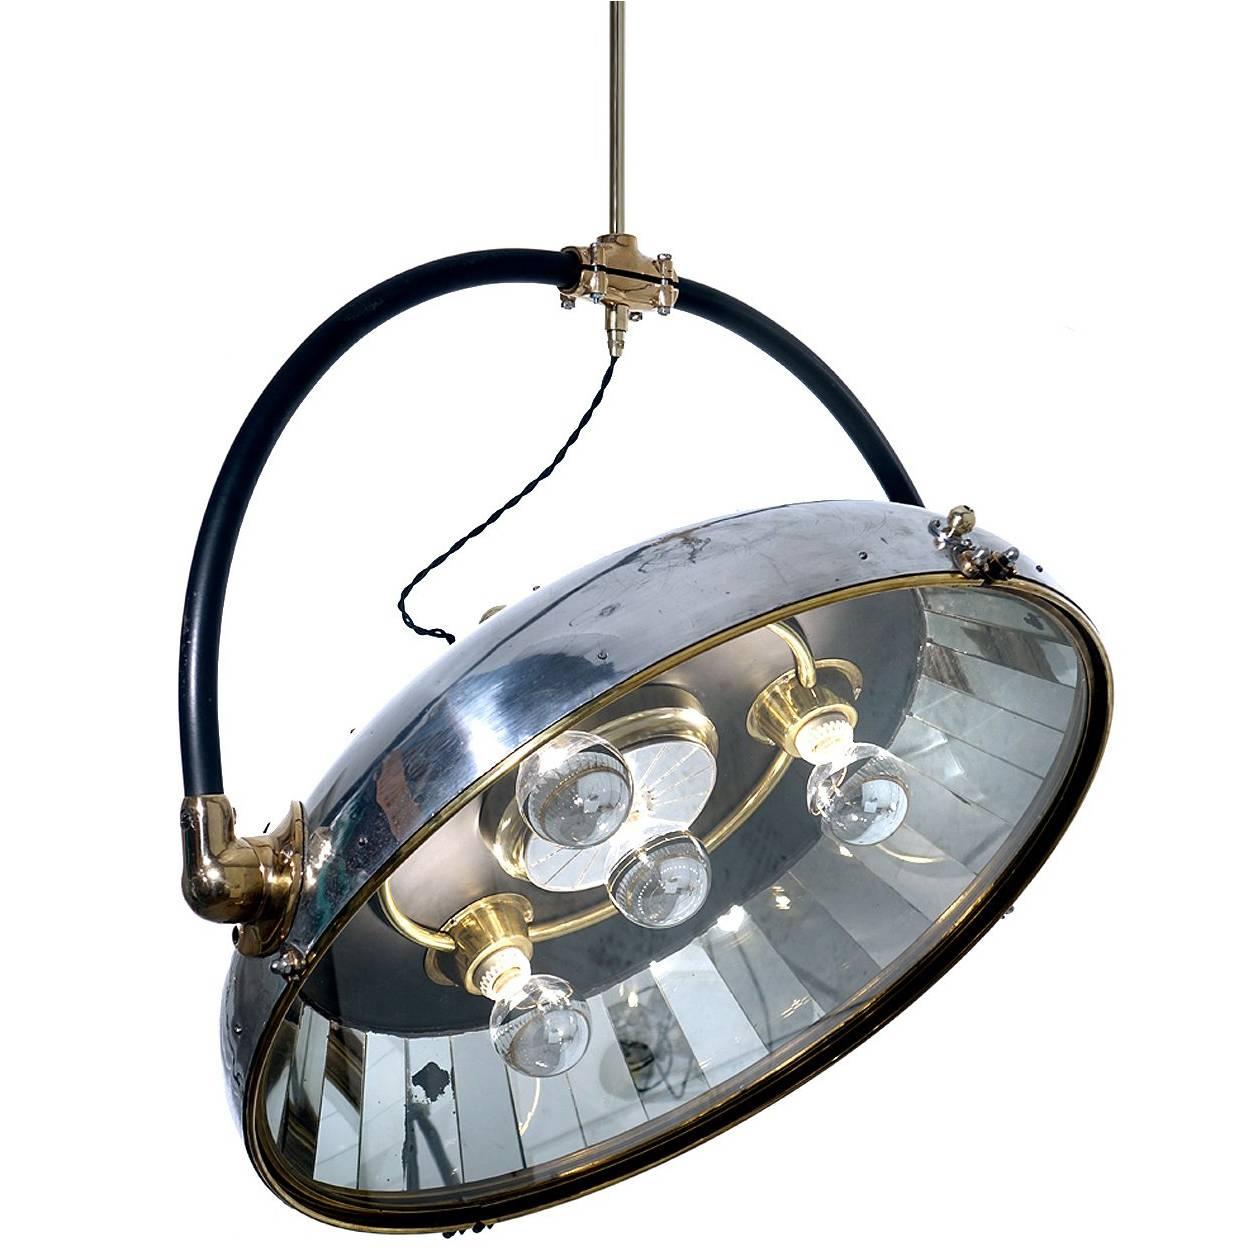 Memorizing French “Scialytique” 50 Mirror Operating Room Lamp